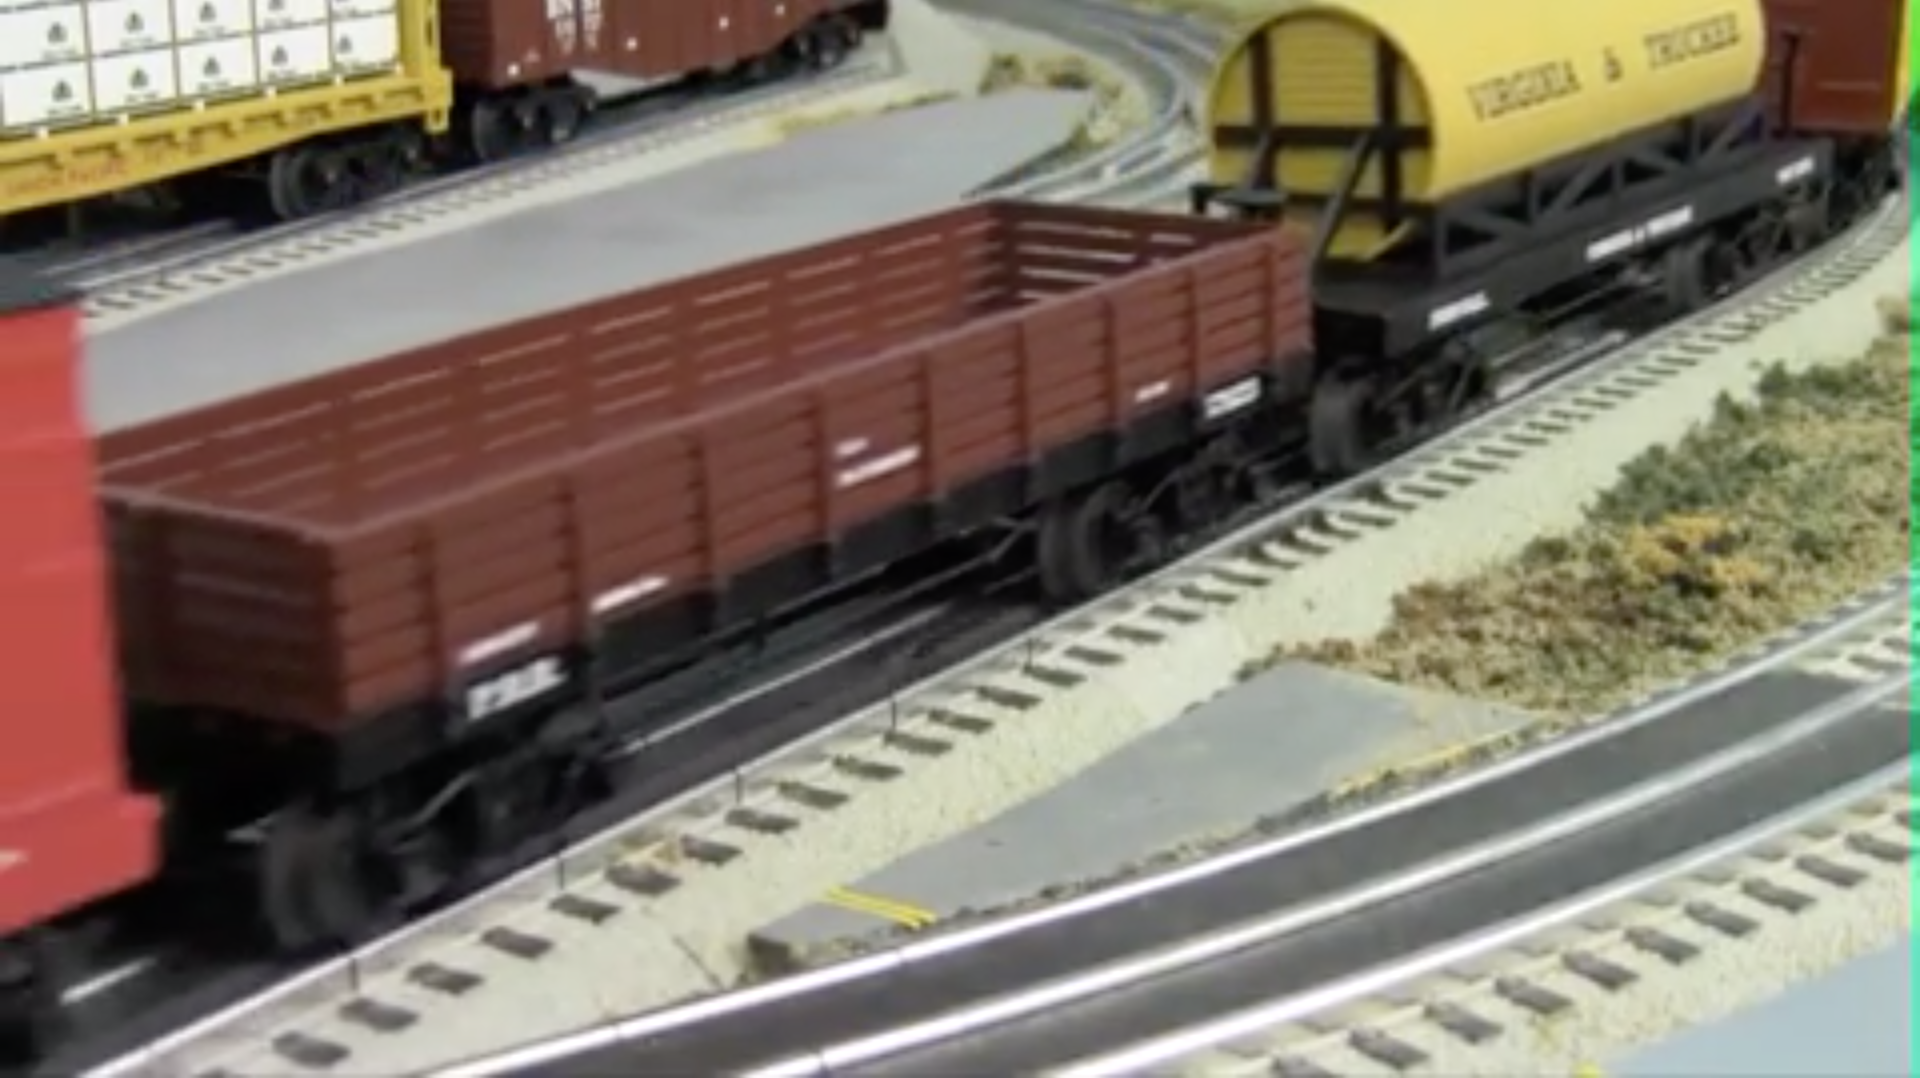 VIDEO: MTH RailKing 19th century freight cars